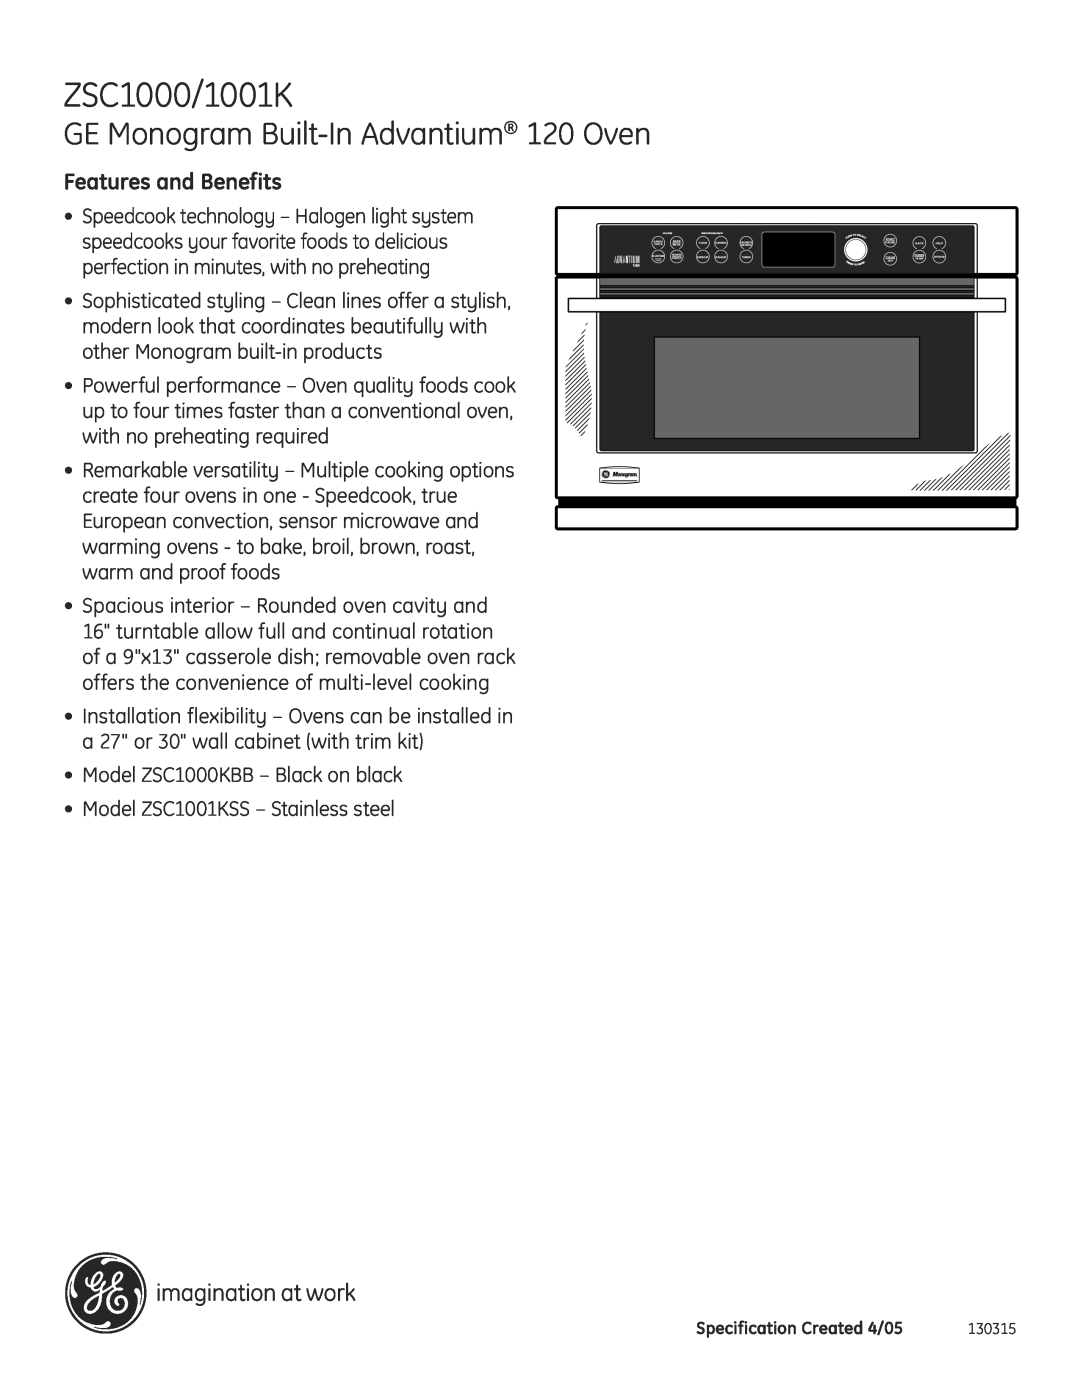 GE ZSC1000/1001K dimensions Features and Benefits, GE Monogram Built-InAdvantium 120 Oven 